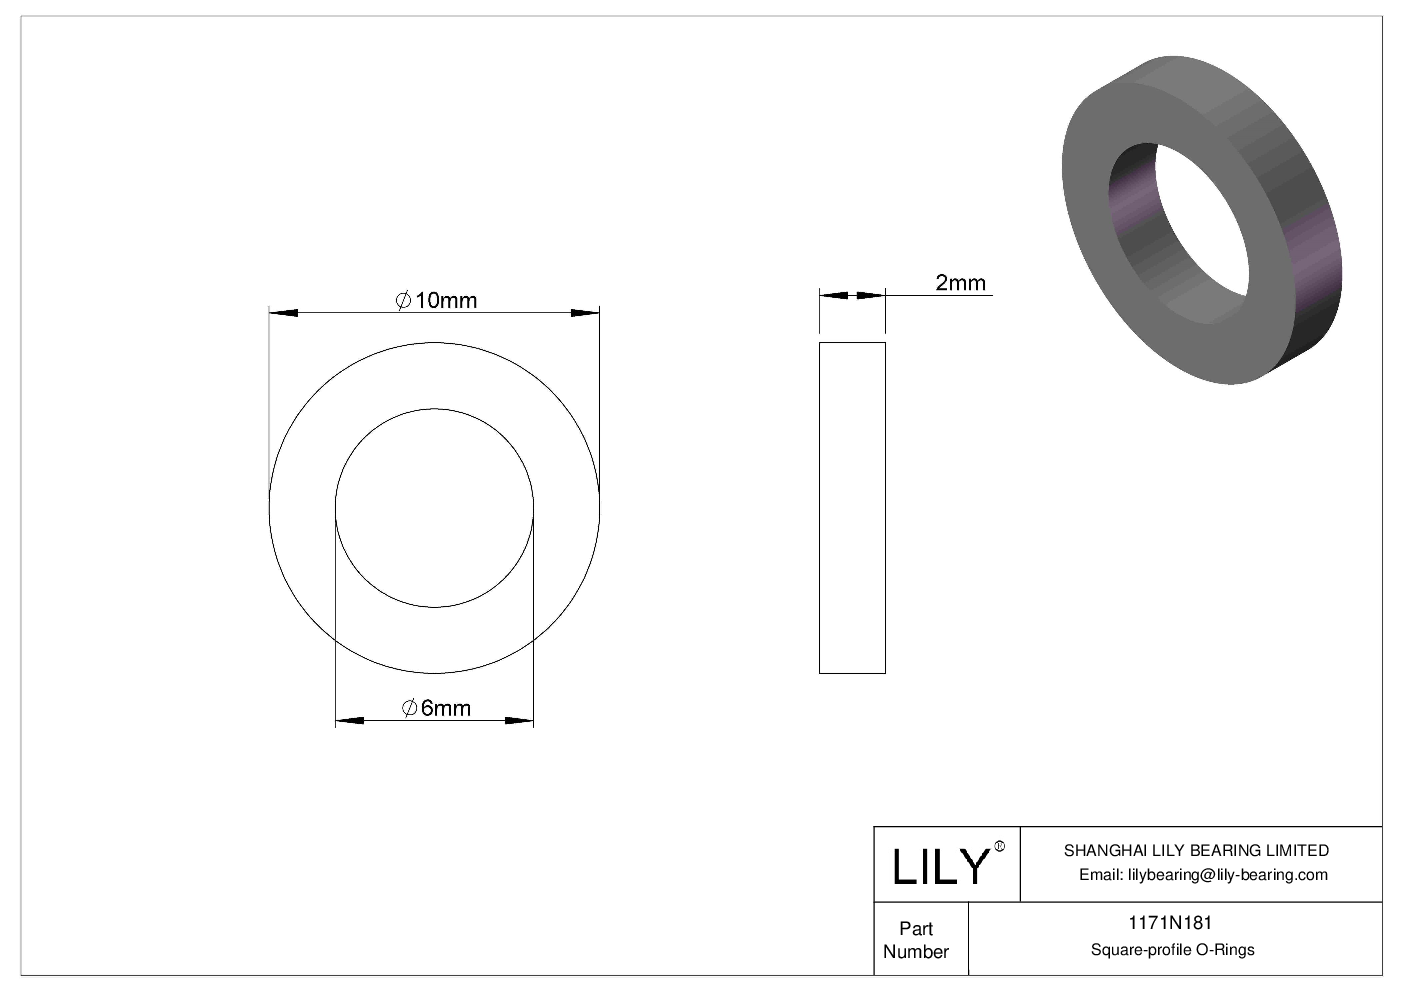 1171N181 Oil Resistant O-Rings Square cad drawing